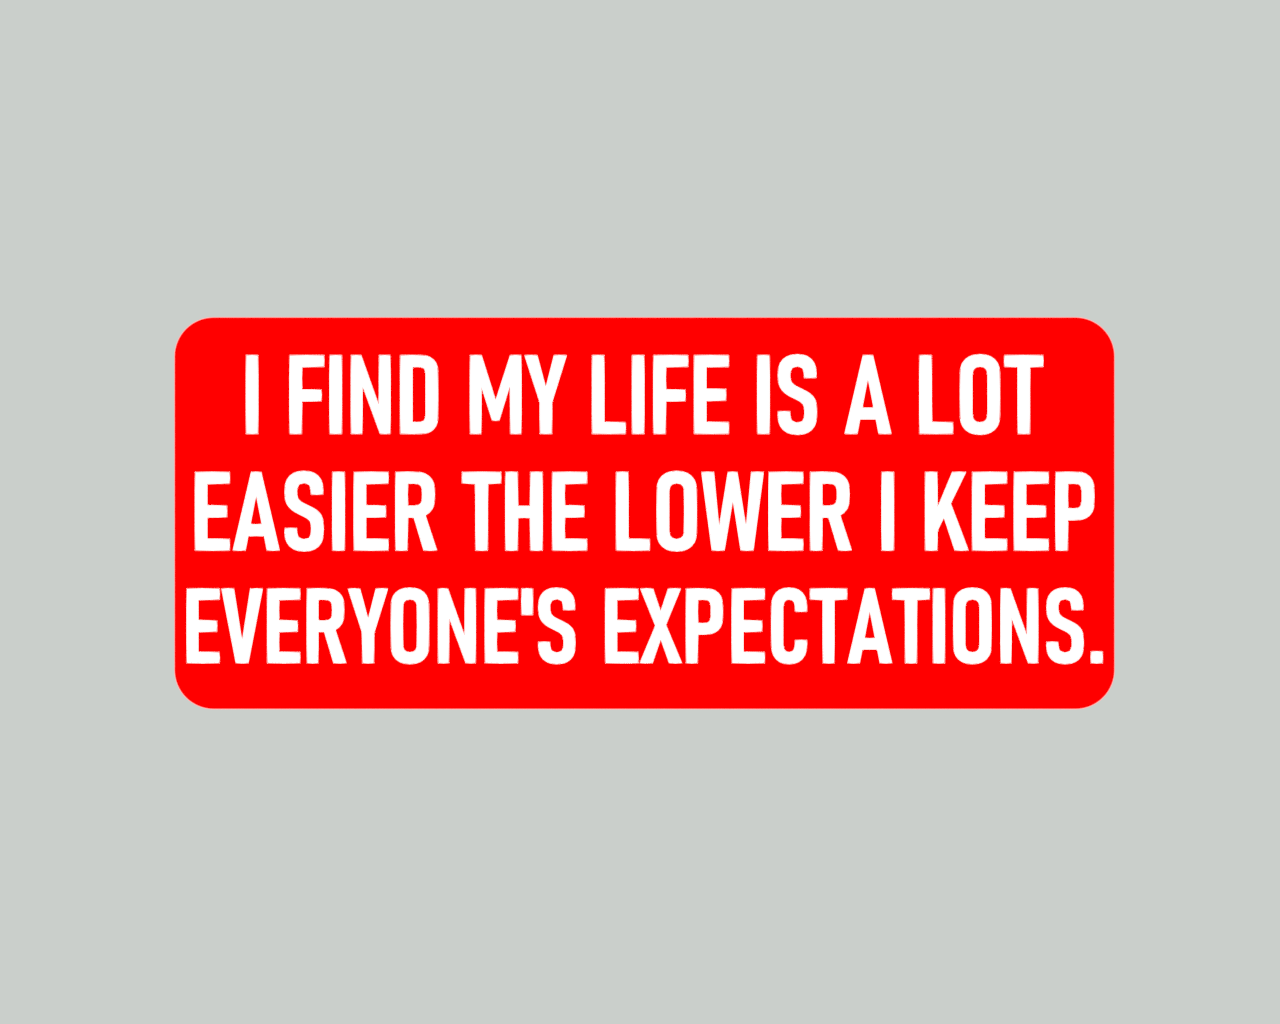 I FIND MY LIFE IS A LOT EASIER THE LOWER I KEEP EVERYONE'S EXPECTATIONS, sign